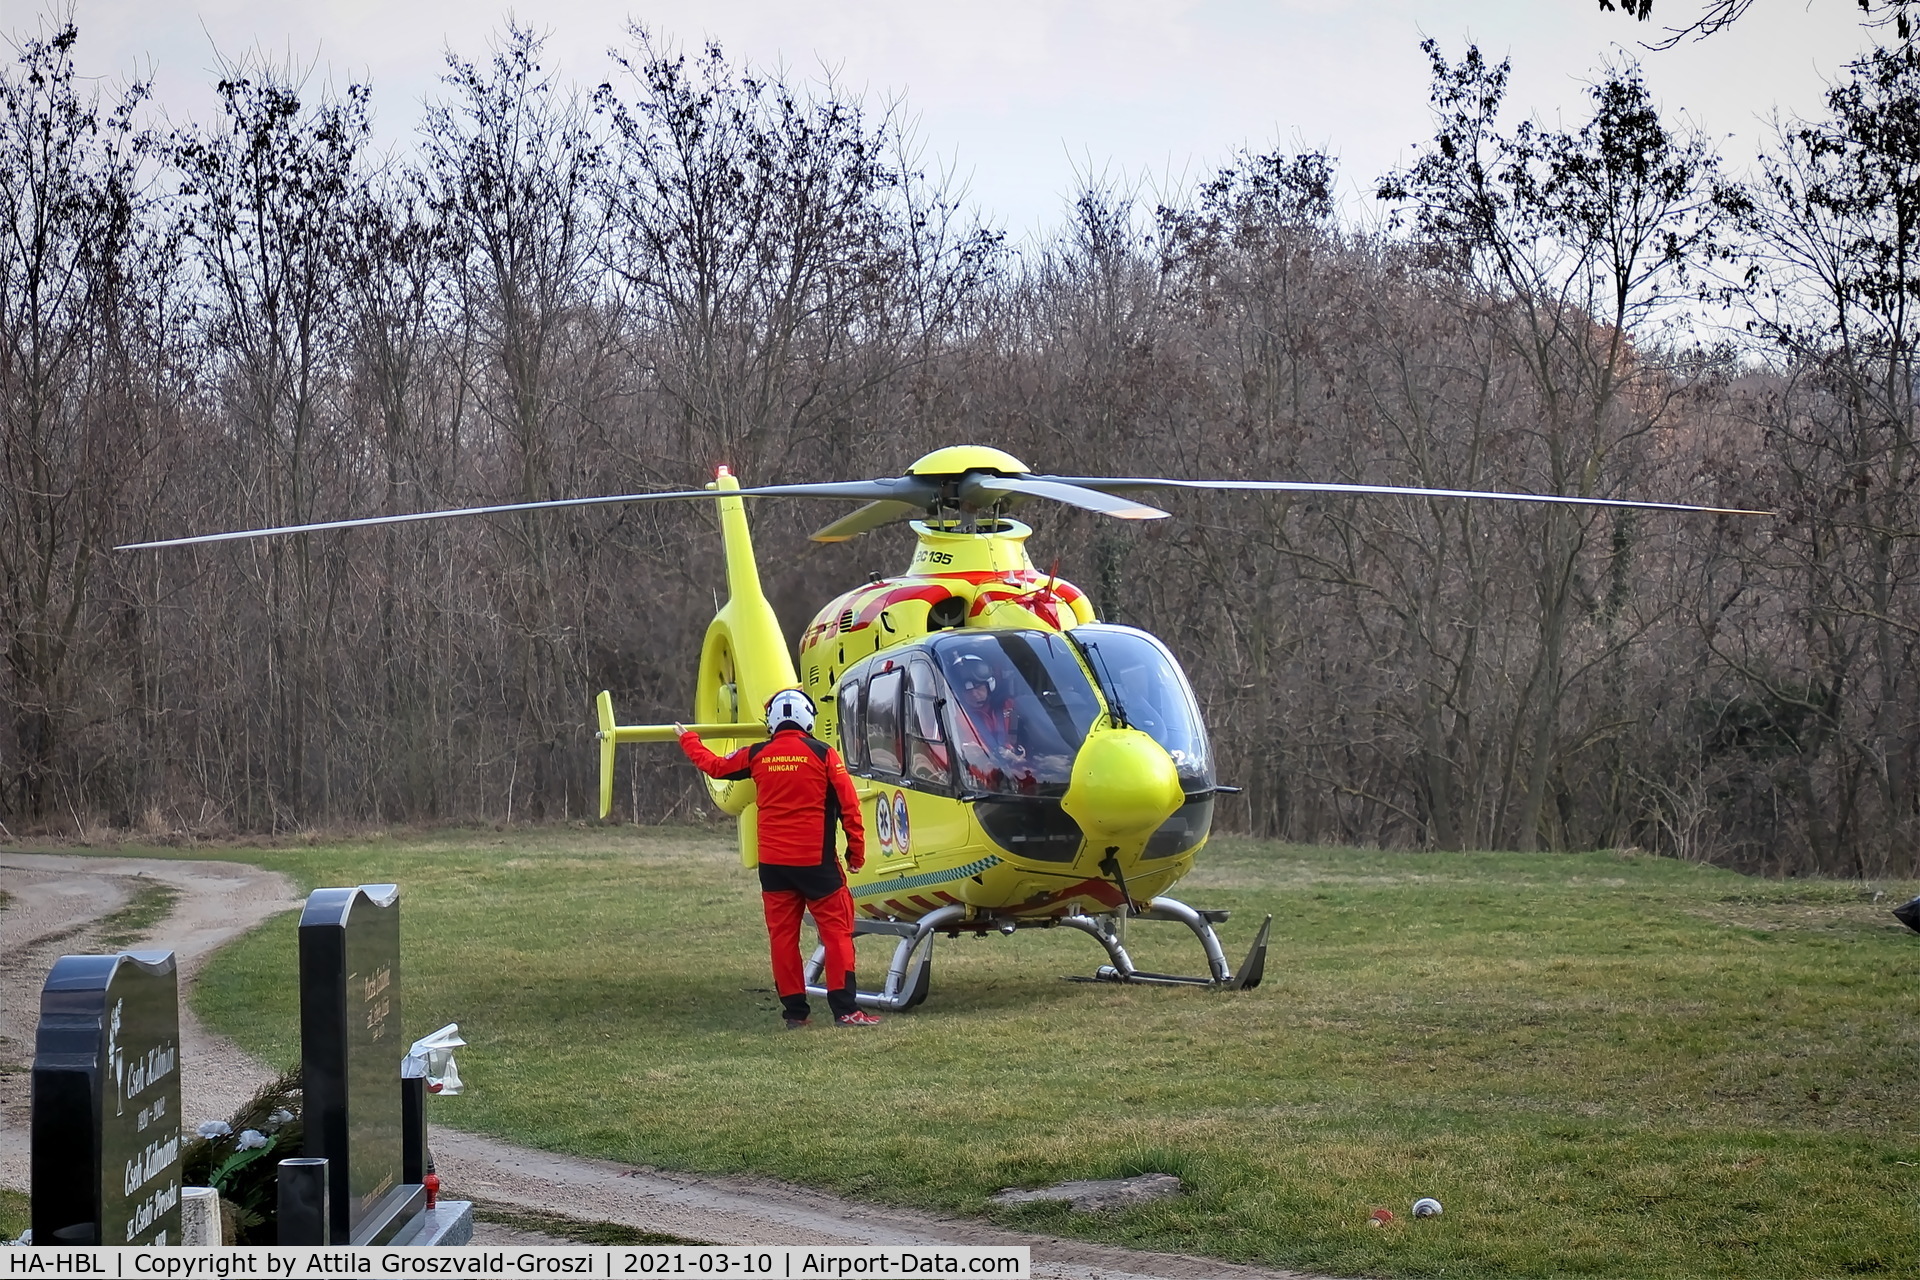 HA-HBL, Eurocopter EC-135P-2+ C/N 0399, Szentkirályszabadja arrived in the village with a patient, but only found a suitable landing place in the cemetery